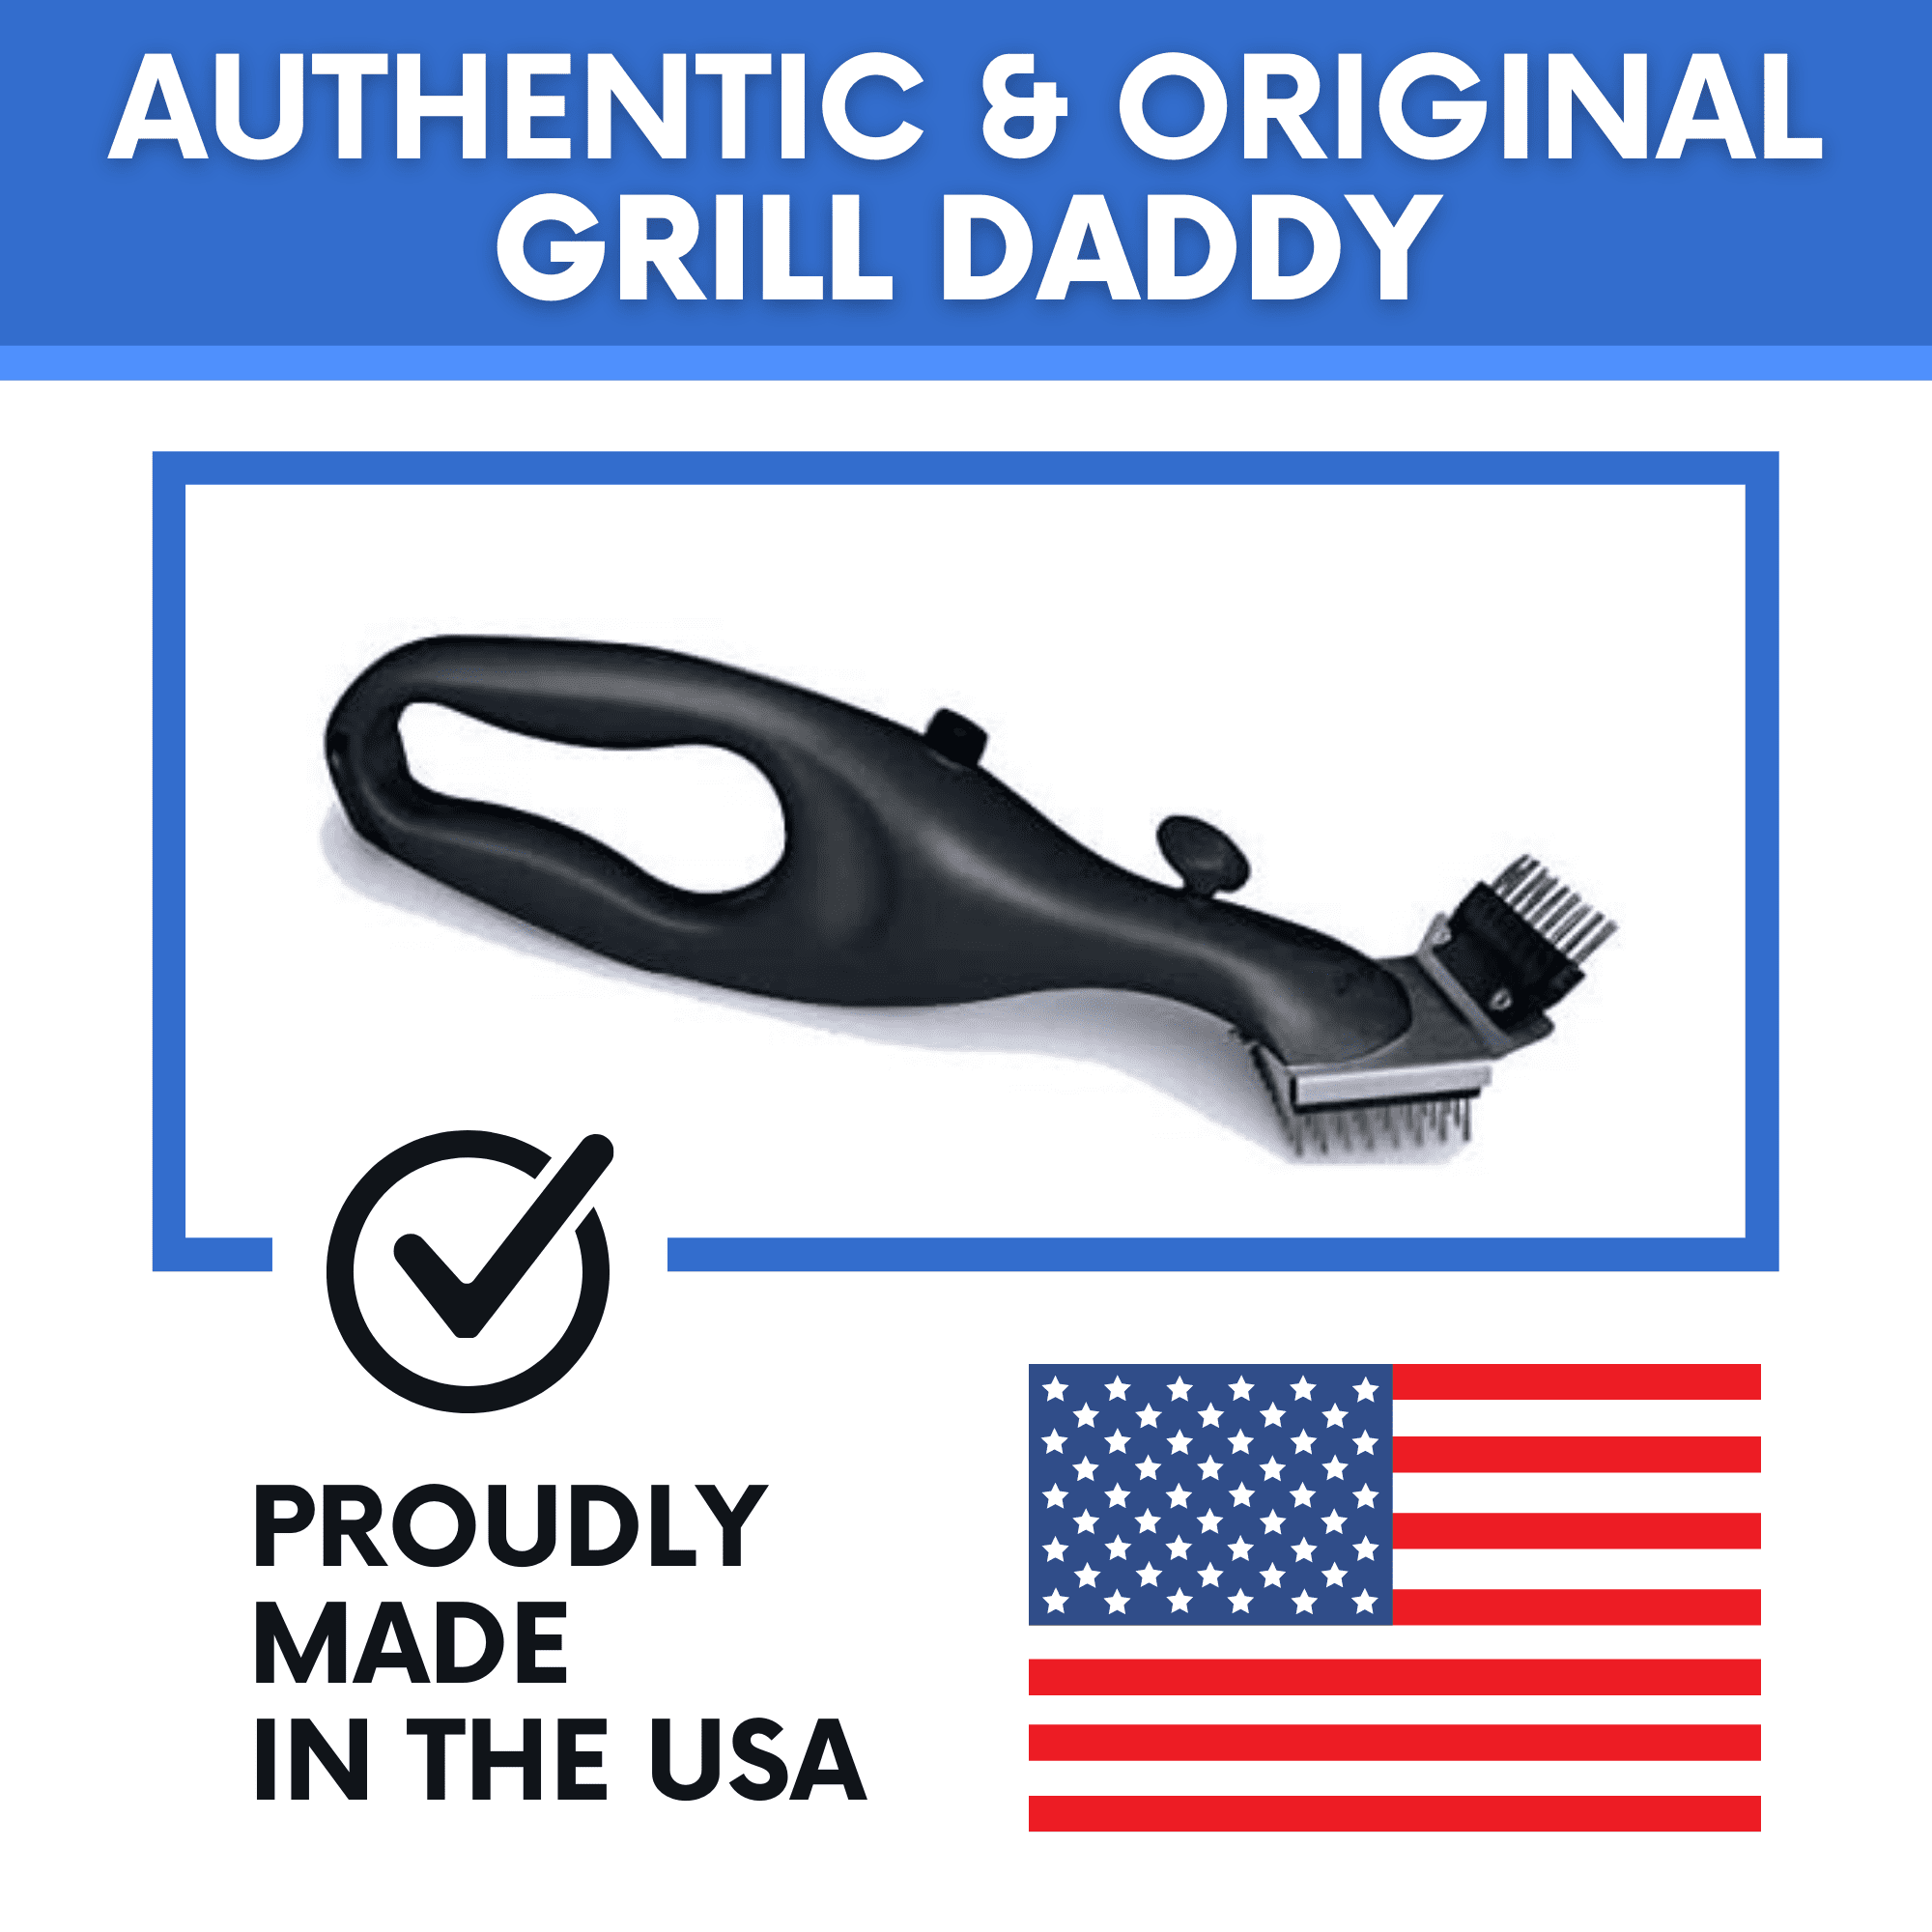  Grill Daddy Made in the USA Bristles GB91062S Barbeque Grill  Steam Brush with Stainless Steel B, 15-Inch, Black : Patio, Lawn & Garden